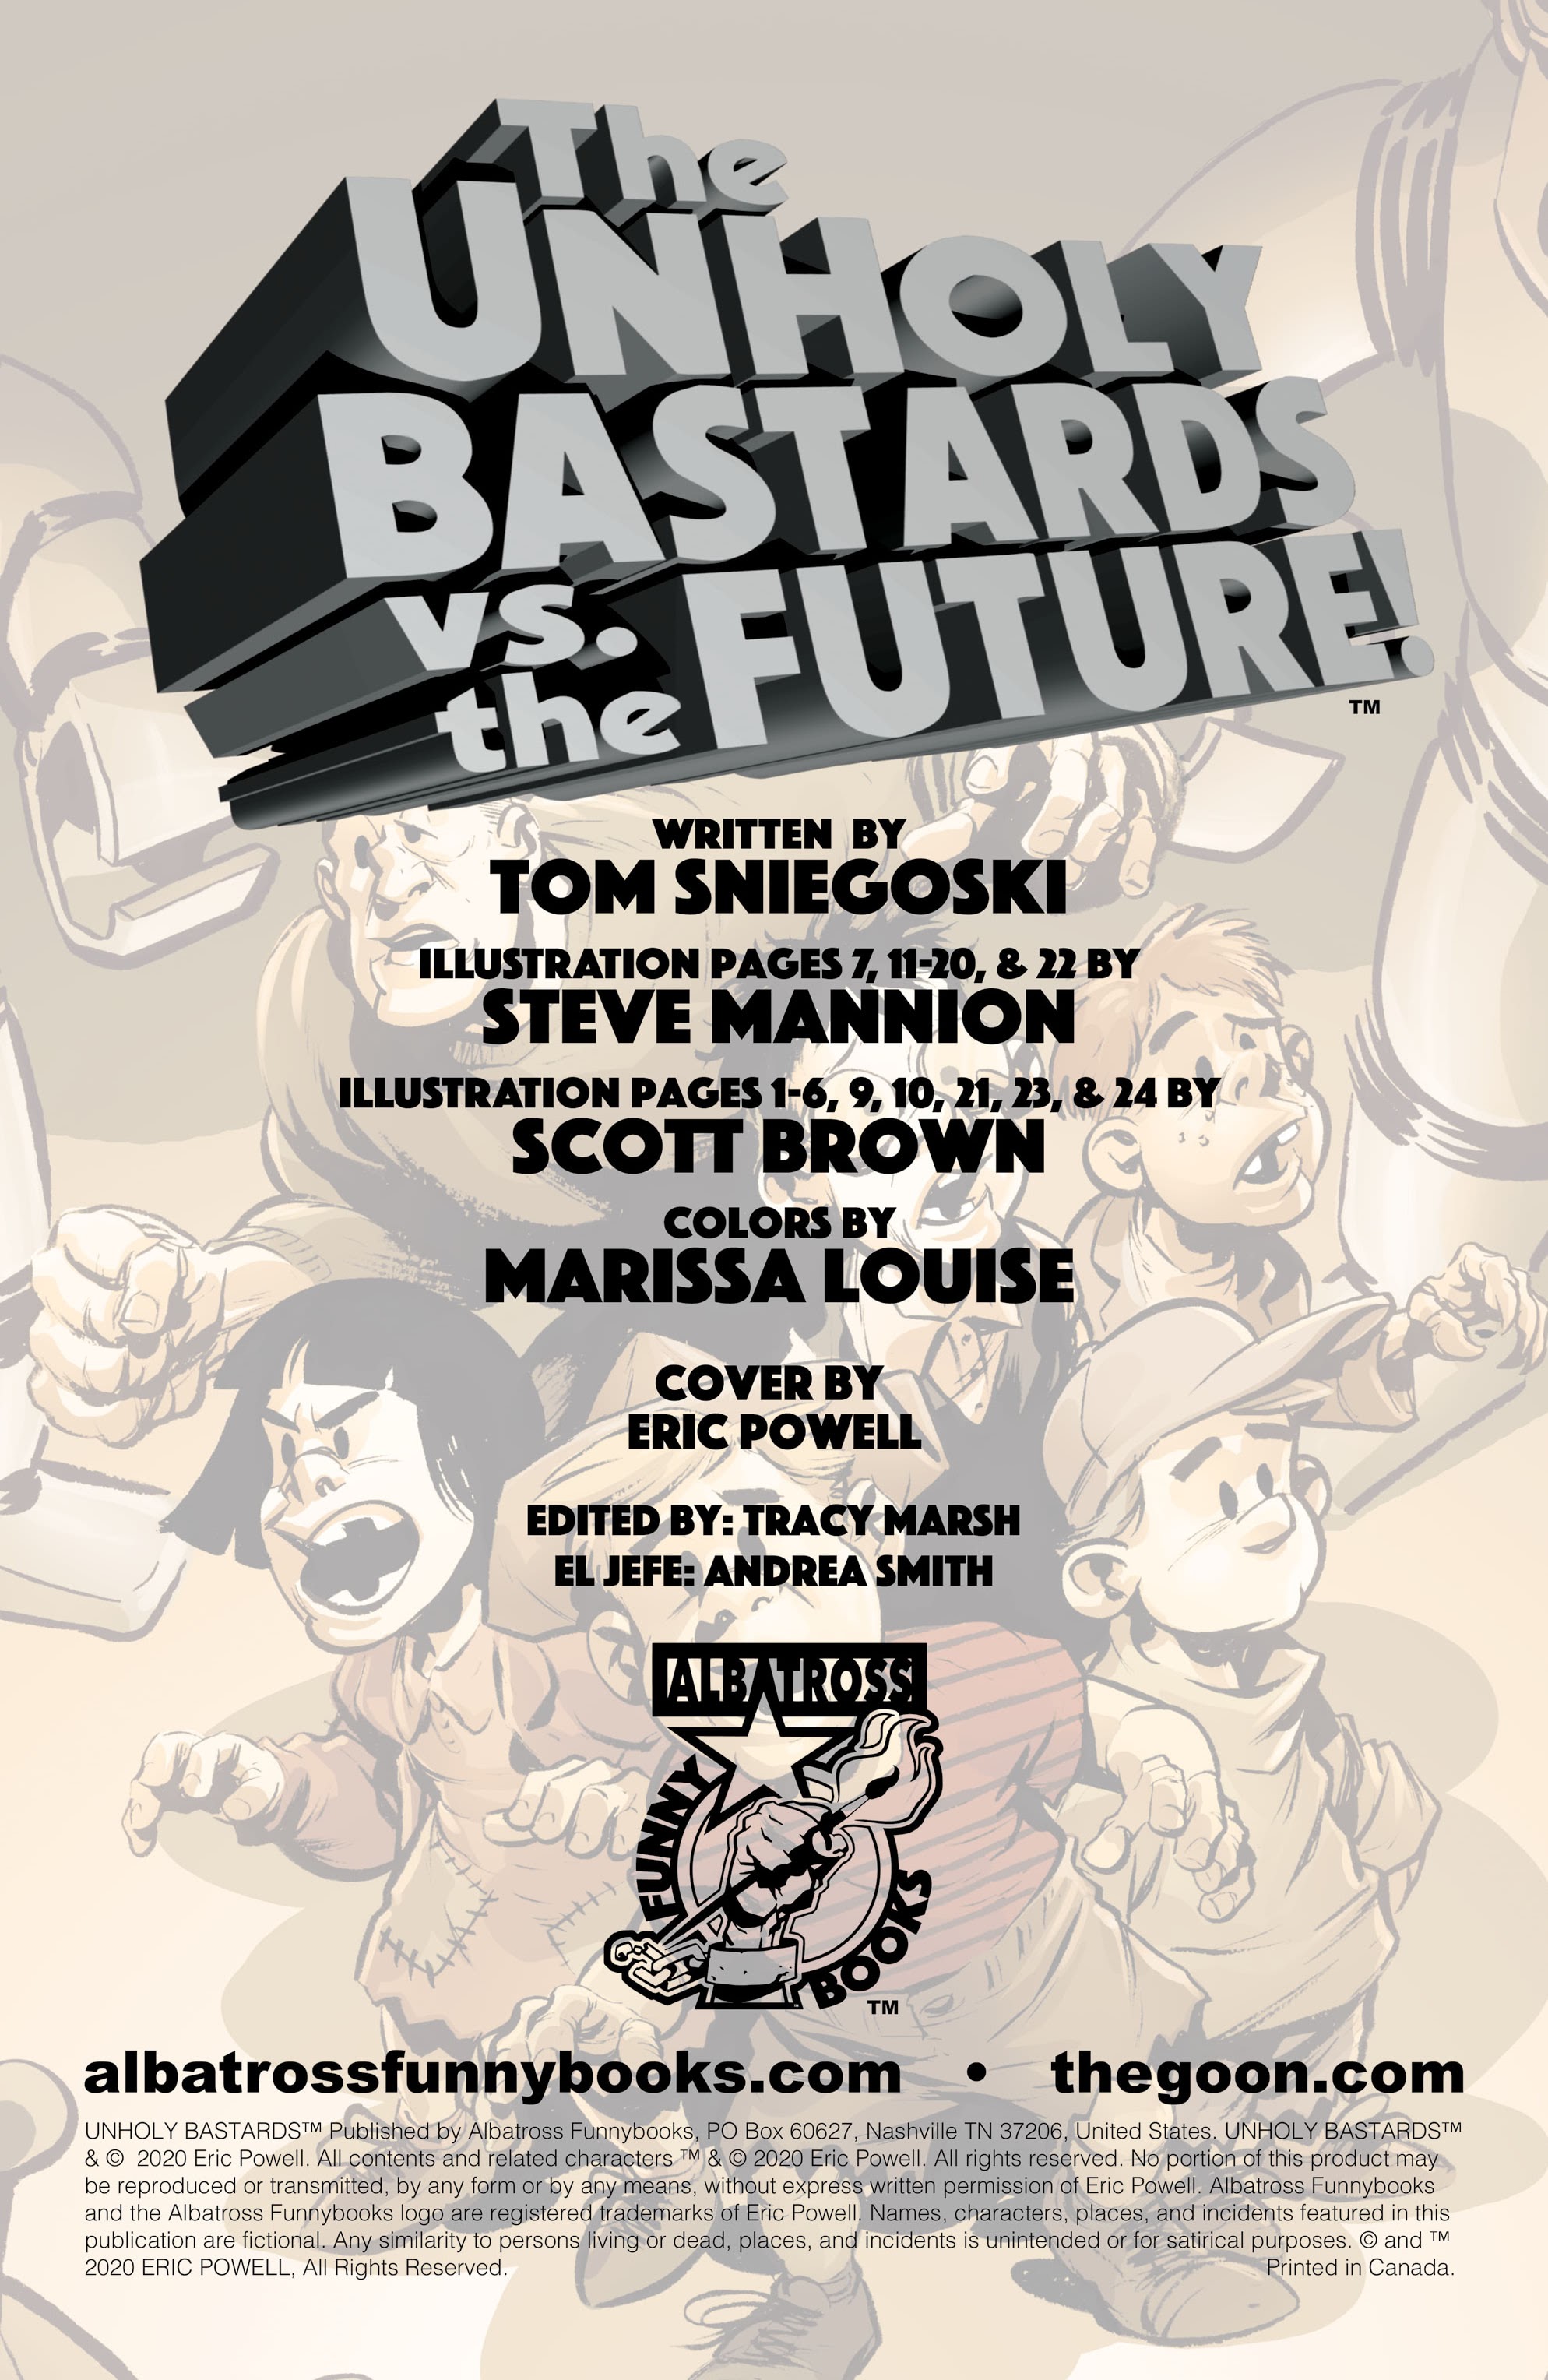 Read online The Unholy Bastards vs. the Future! comic -  Issue # Full - 2